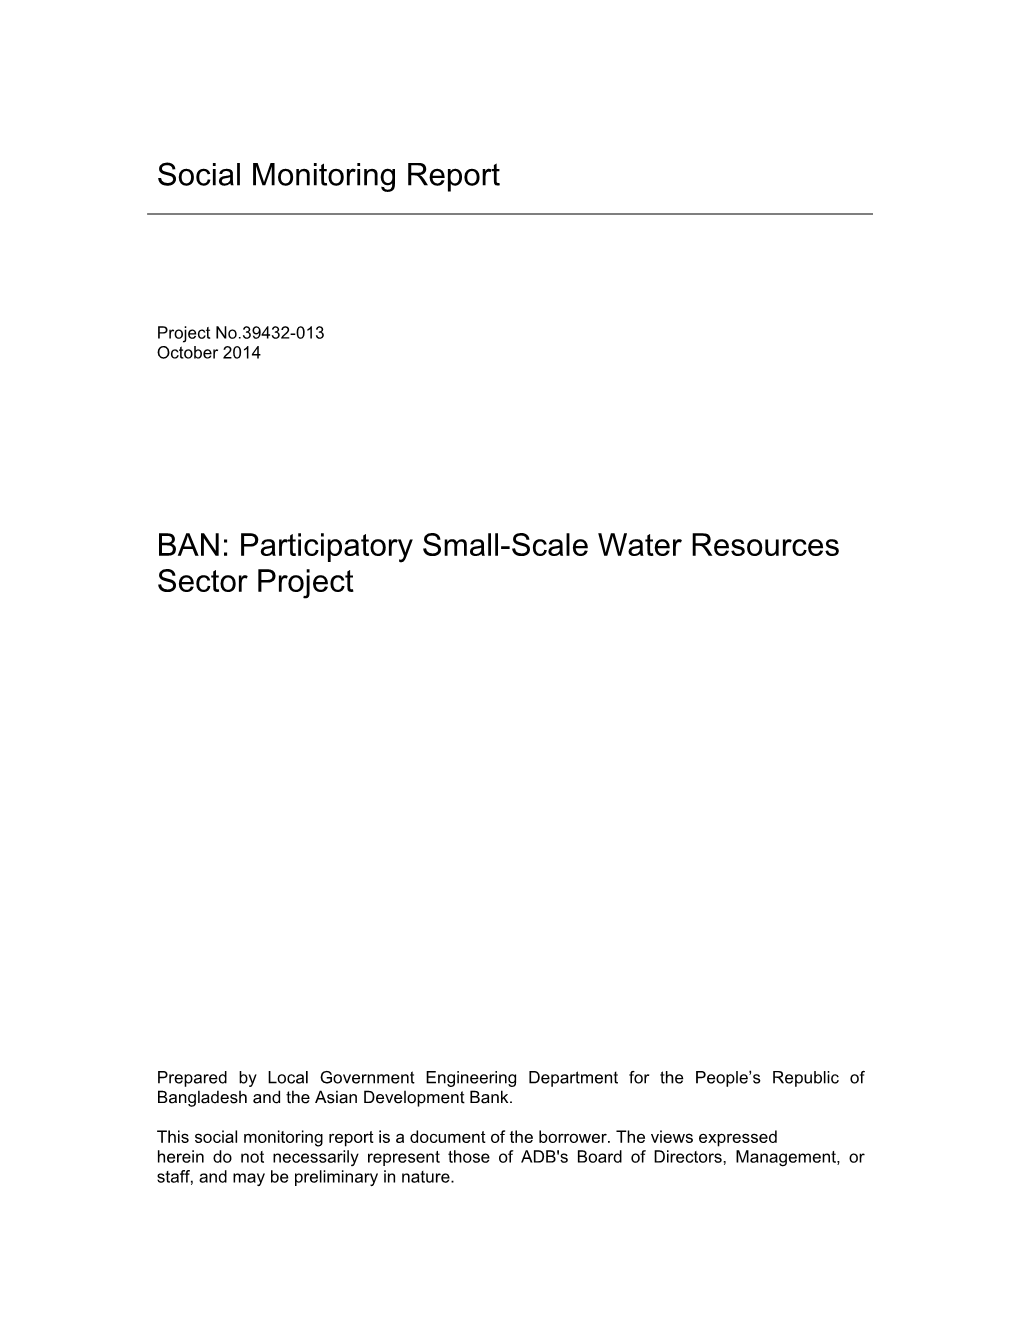 Participatory Small-Scale Water Resources Sector Project